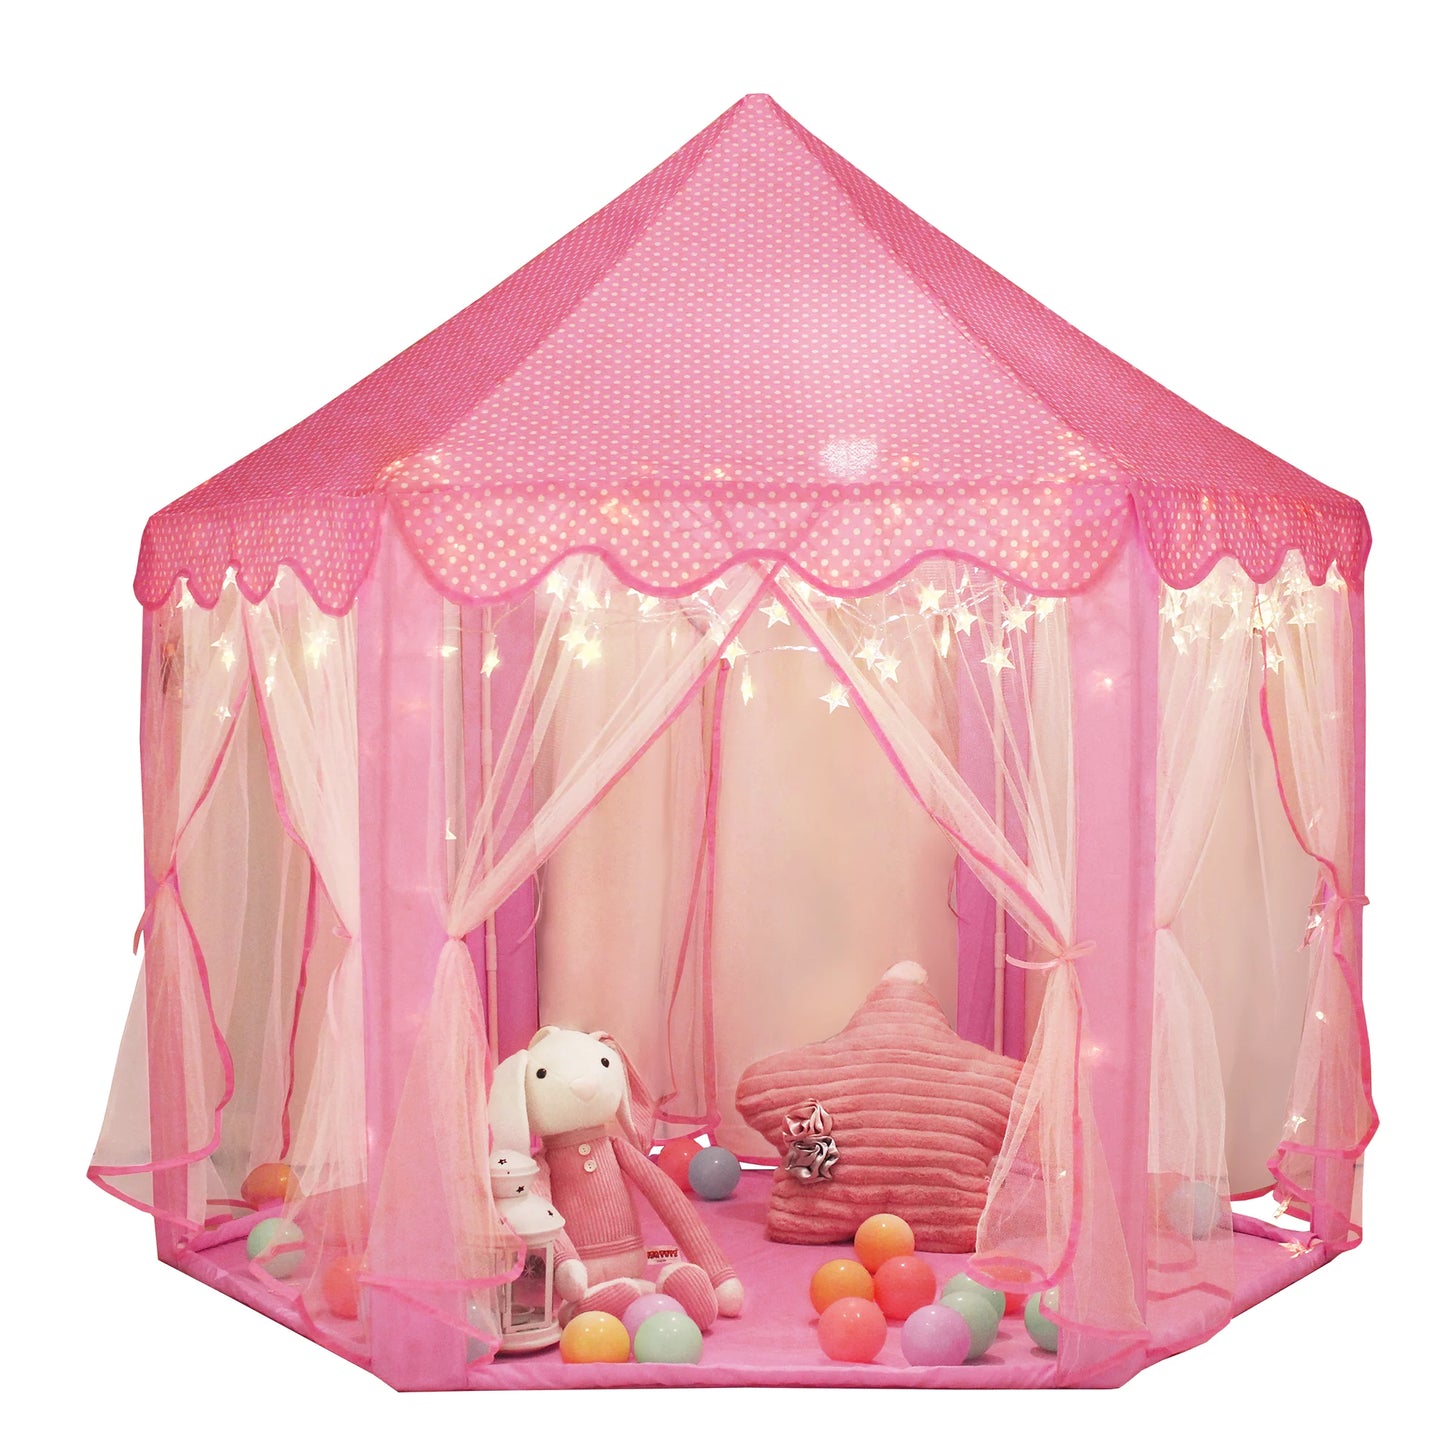 Princess Castle Kids Play Tent Toys for 3 6 8 12 Years Indoor Girls Hexagon Playhouse with Star Lights